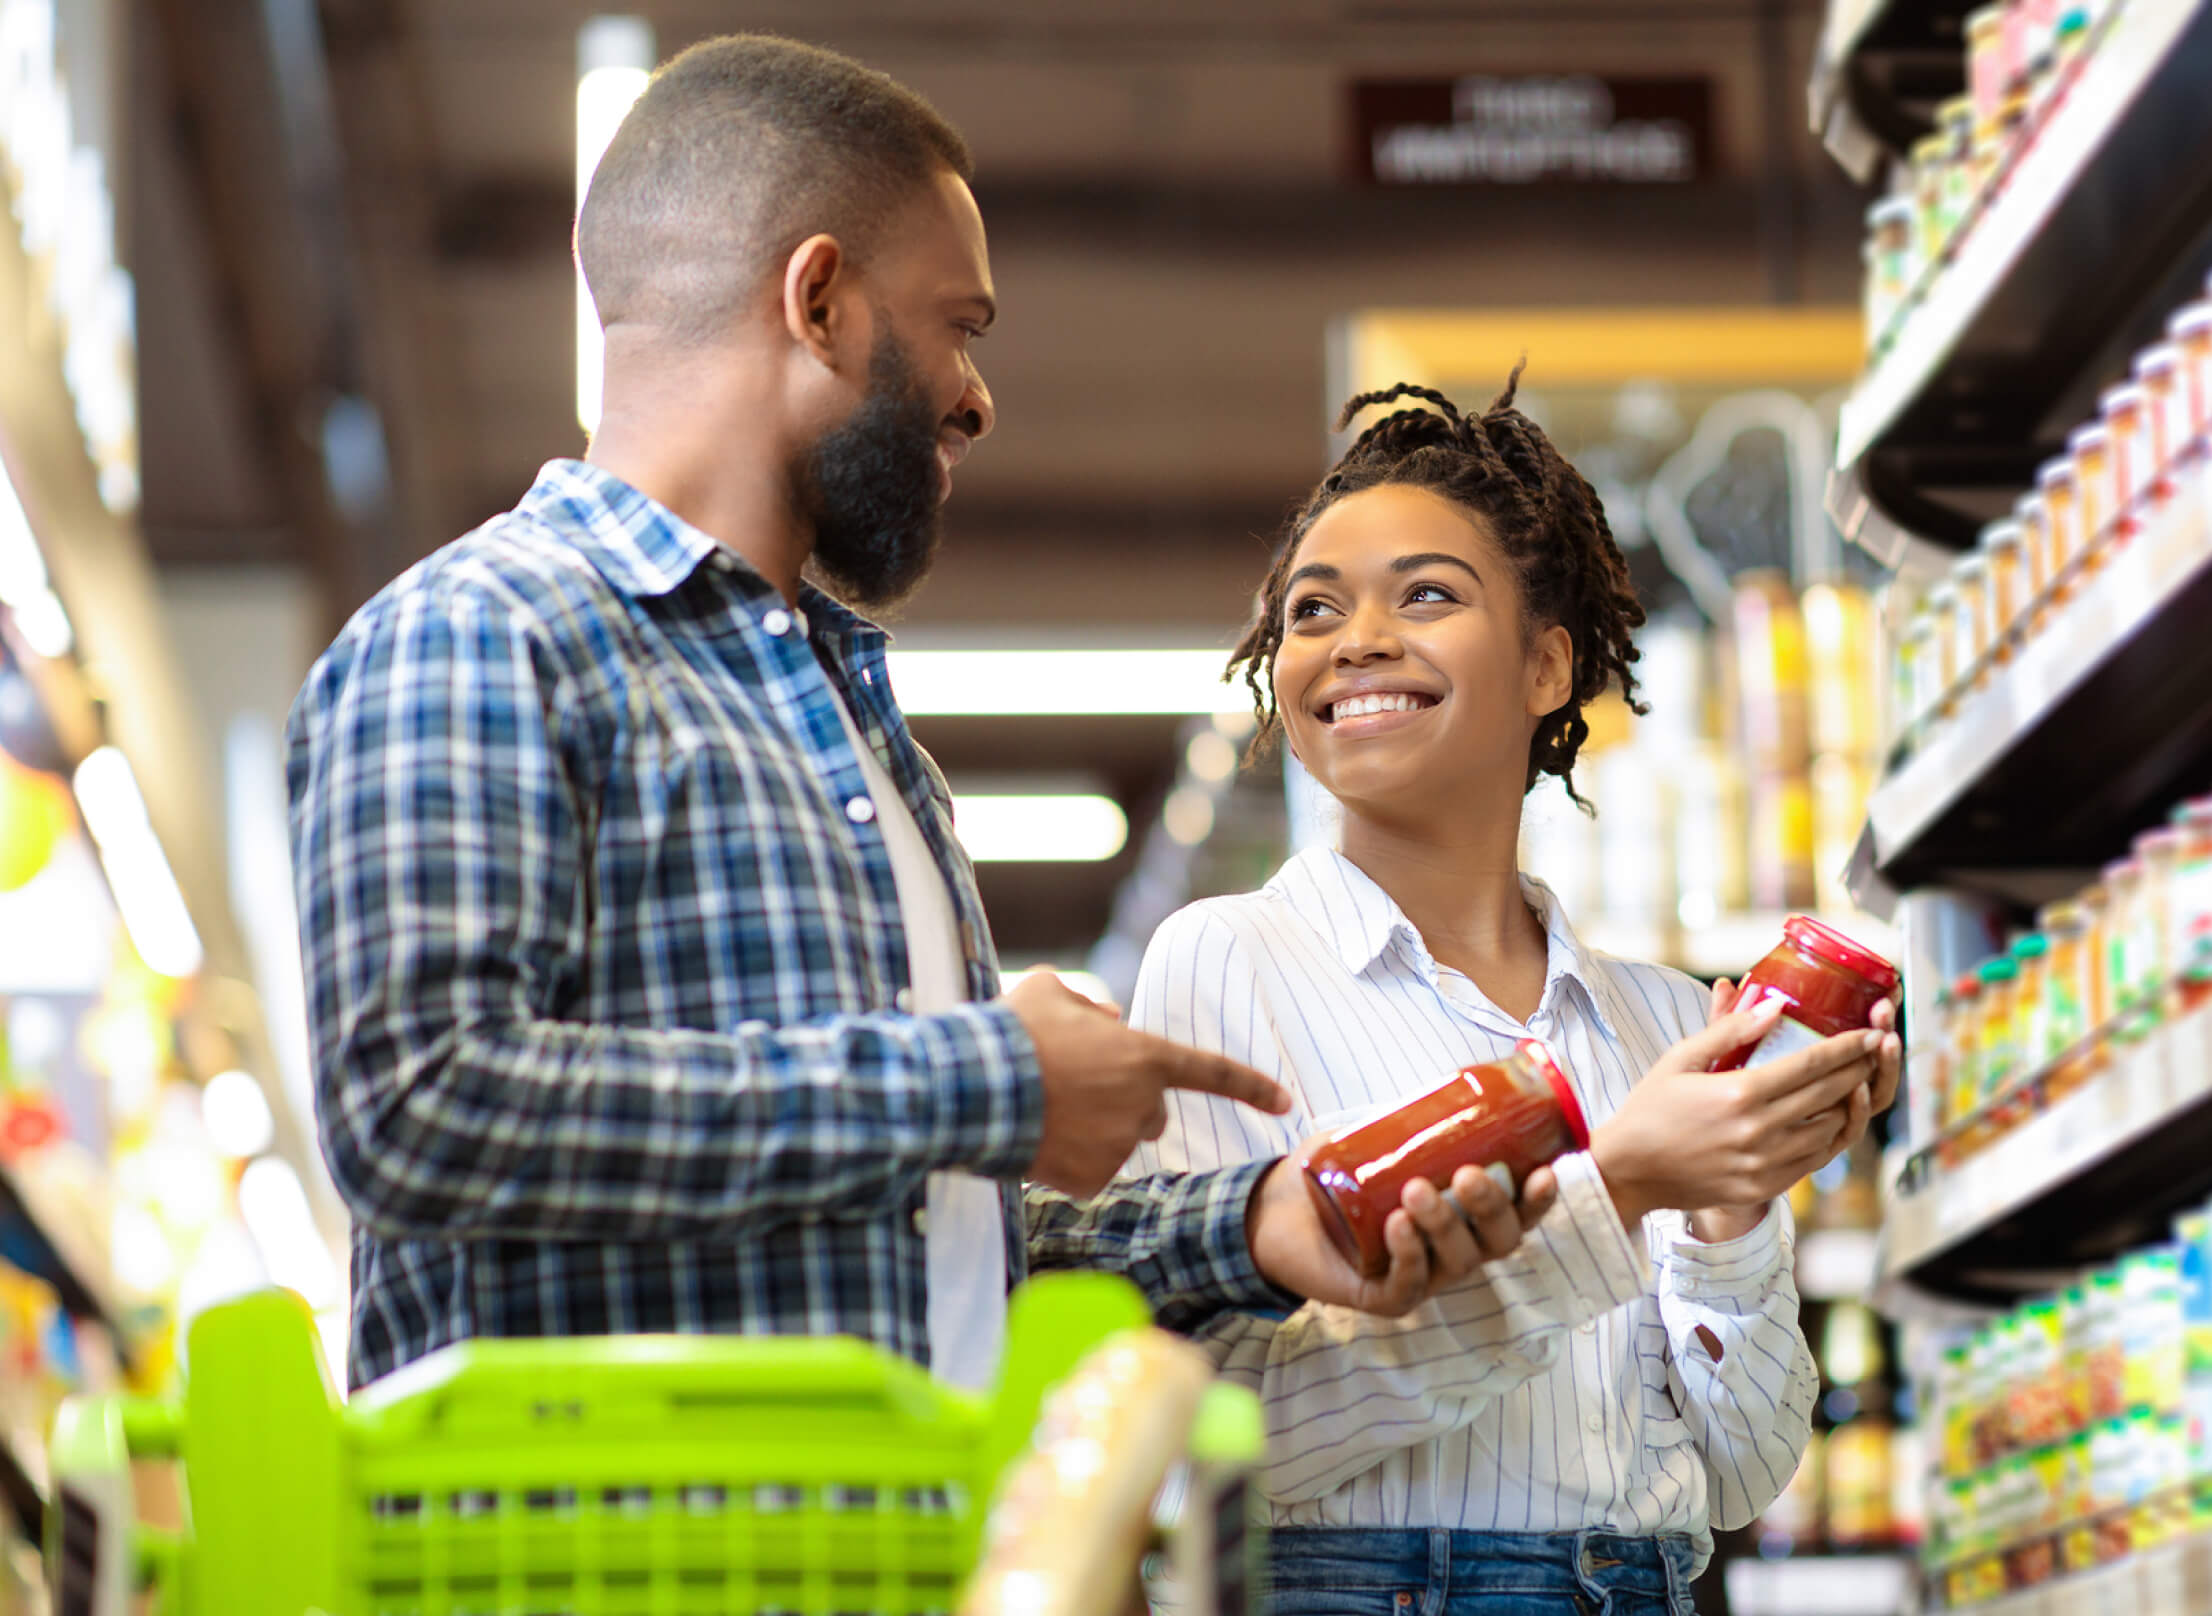 Woman and man shopping in a grocery story and smiling at each other while holding jars of sauce